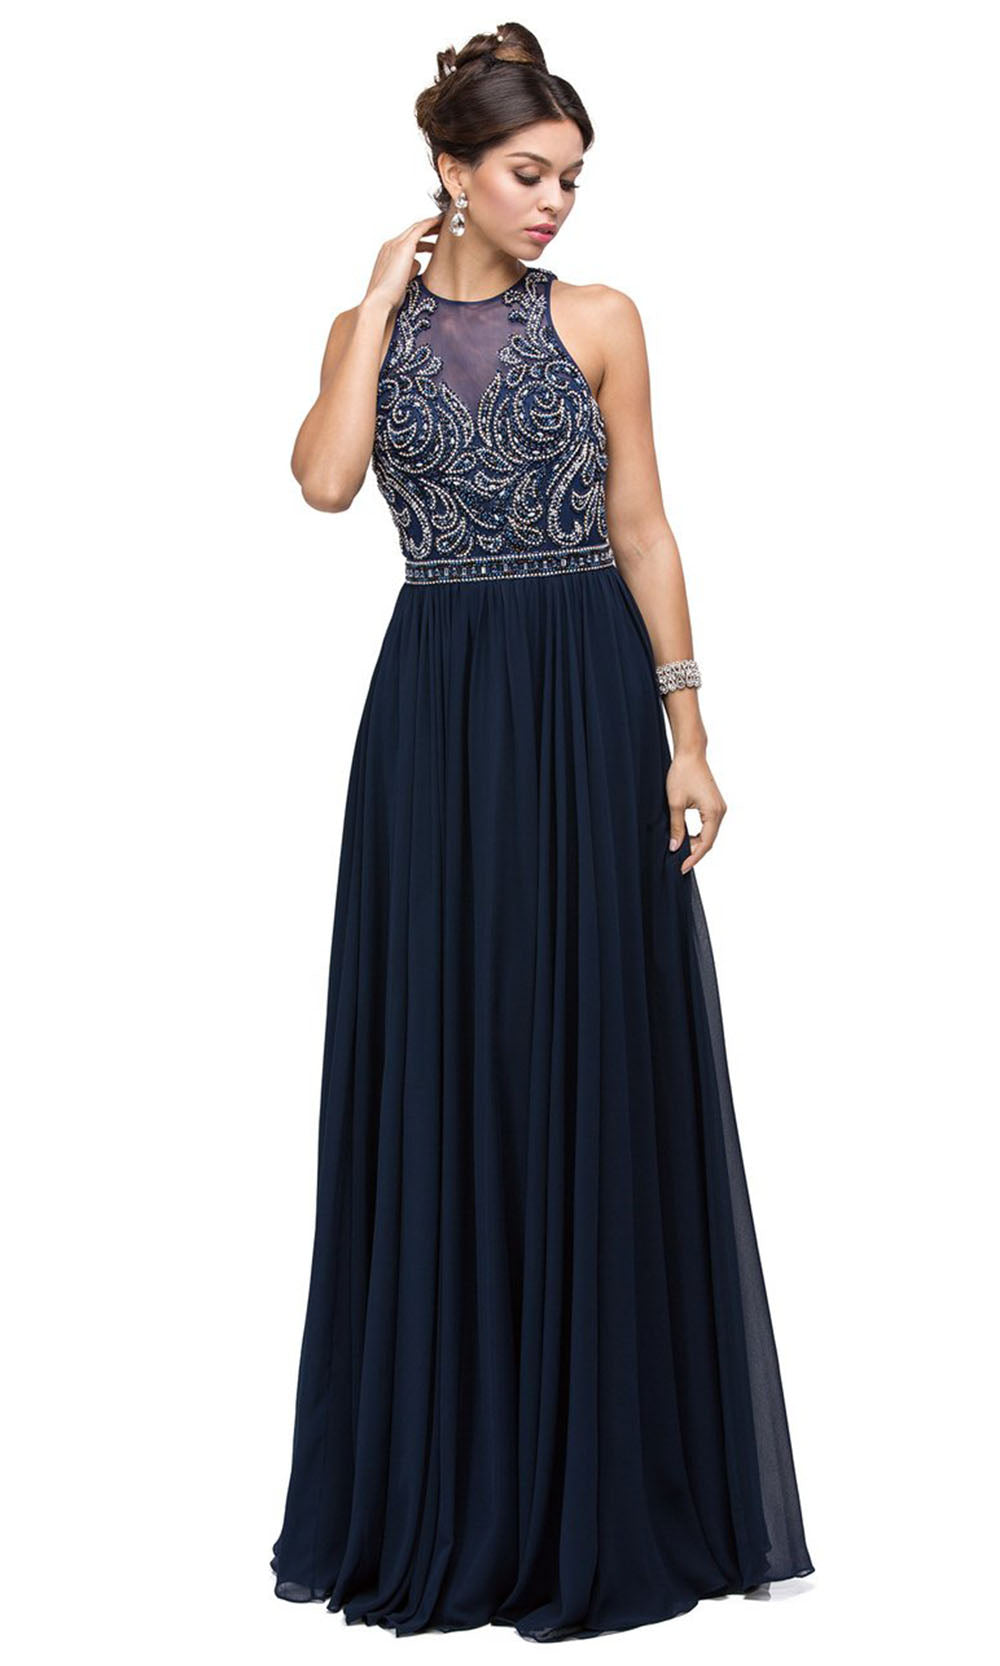 Dancing Queen - 9689 Embroidered Halter Neck A-Line Dress In Blue